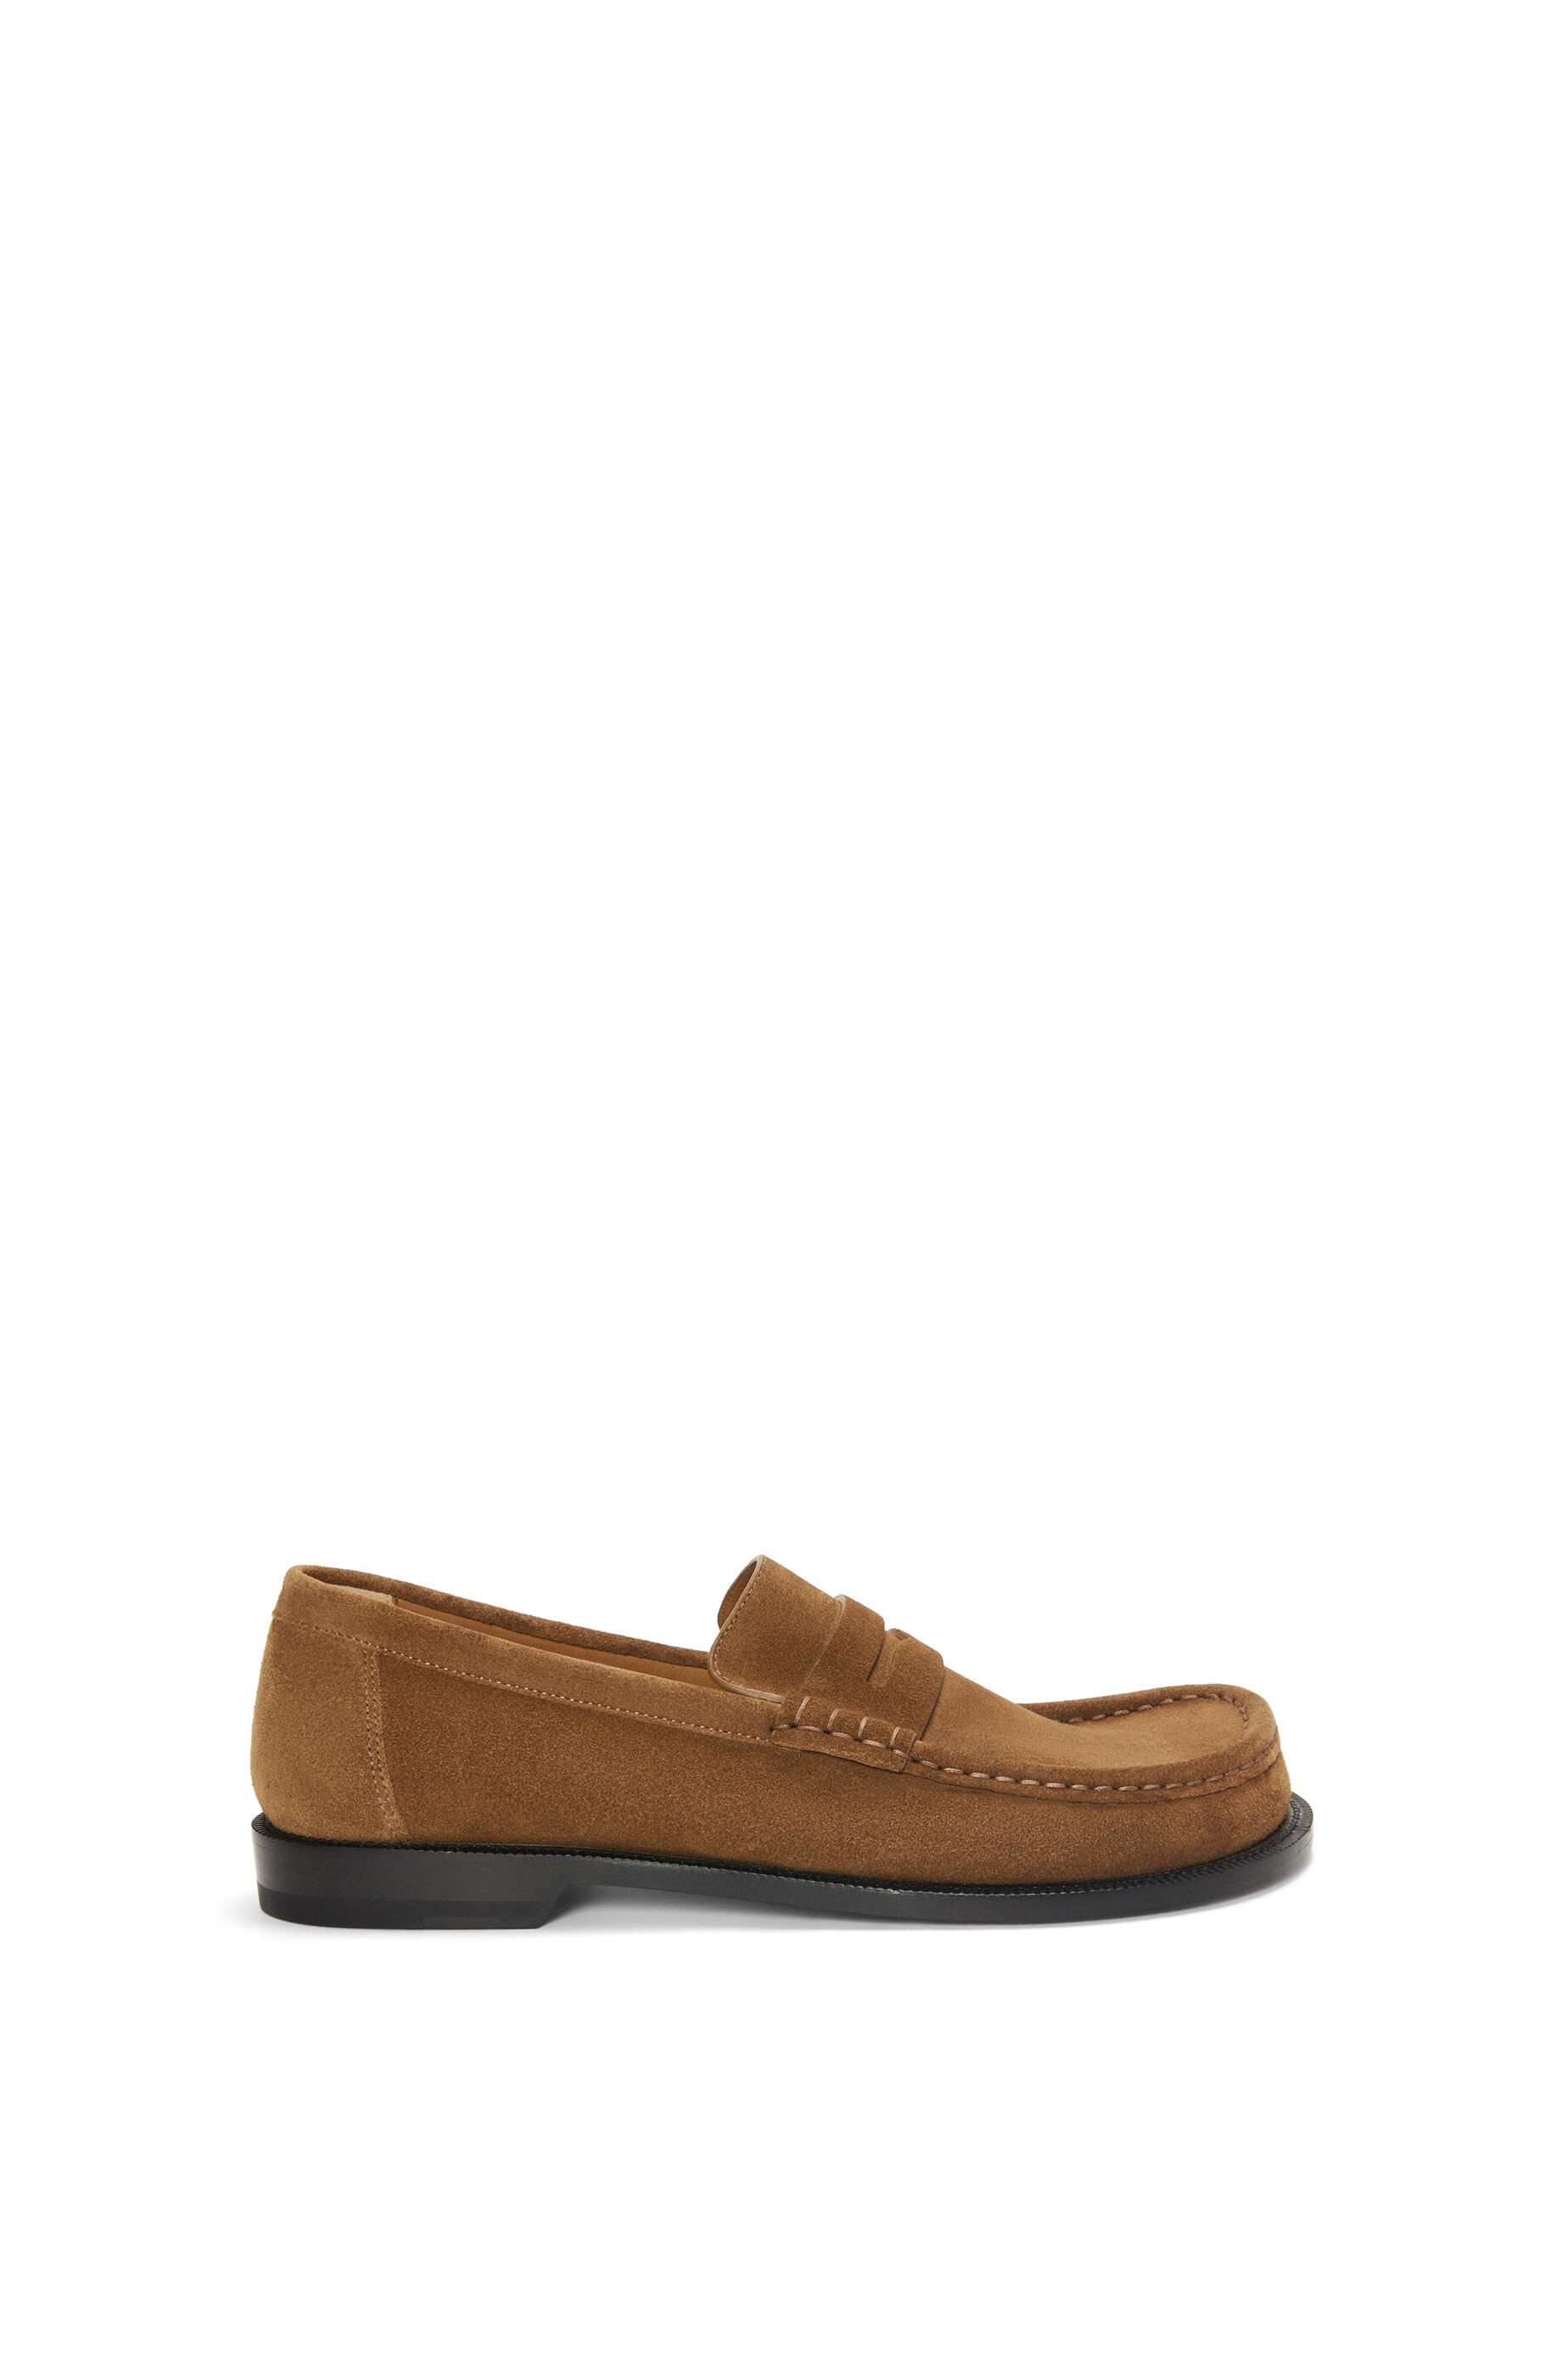 Campo loafer in suede calfskin - 1